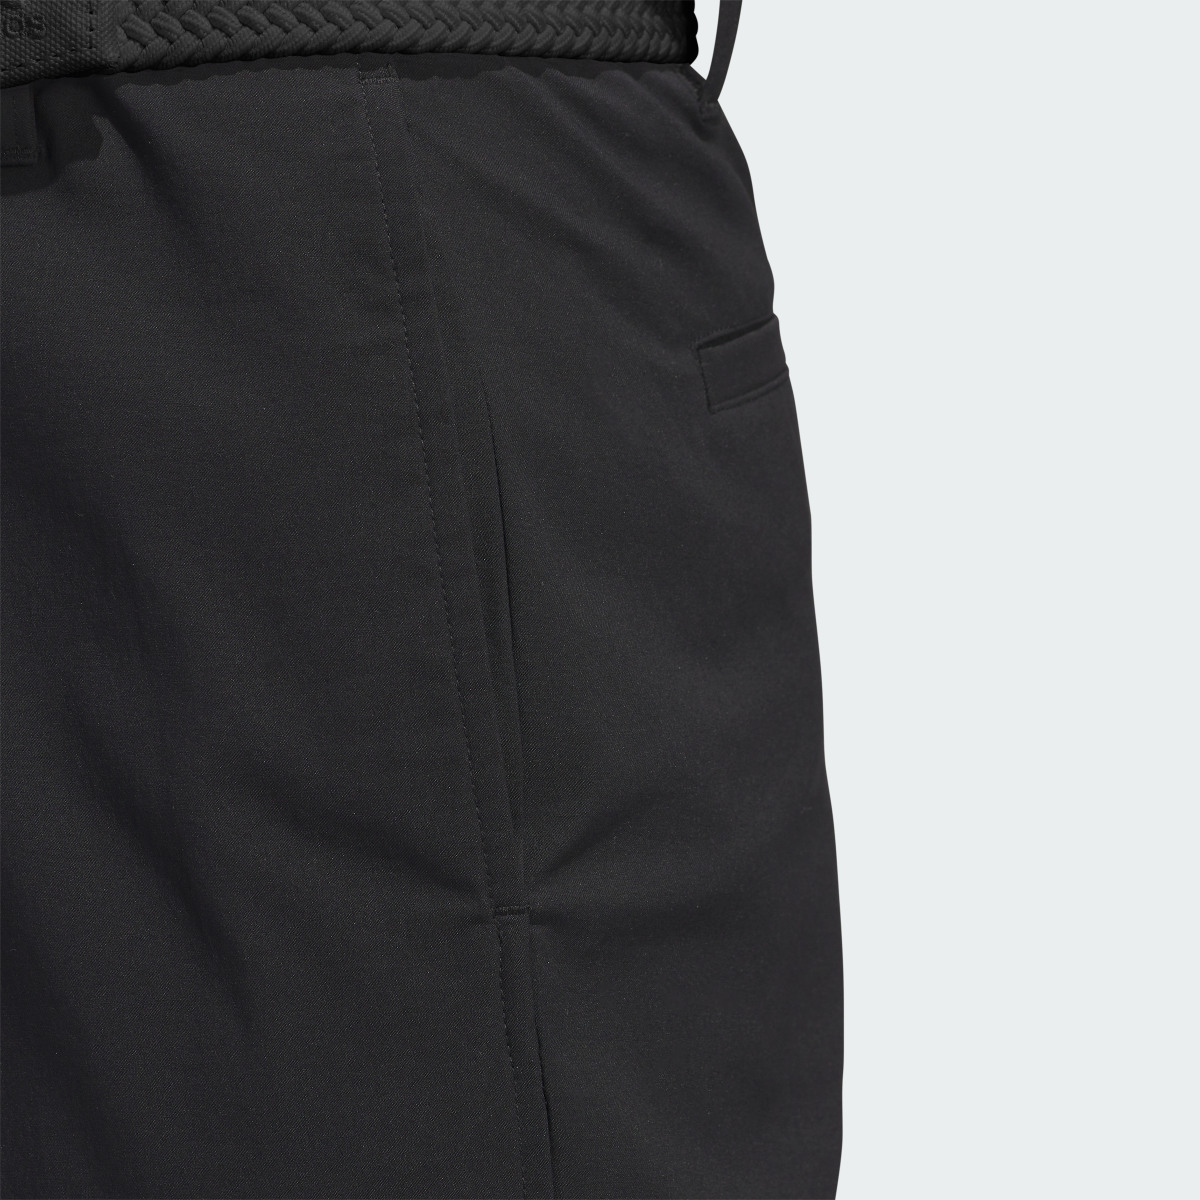 Adidas Ultimate365 Chino Trousers. 6